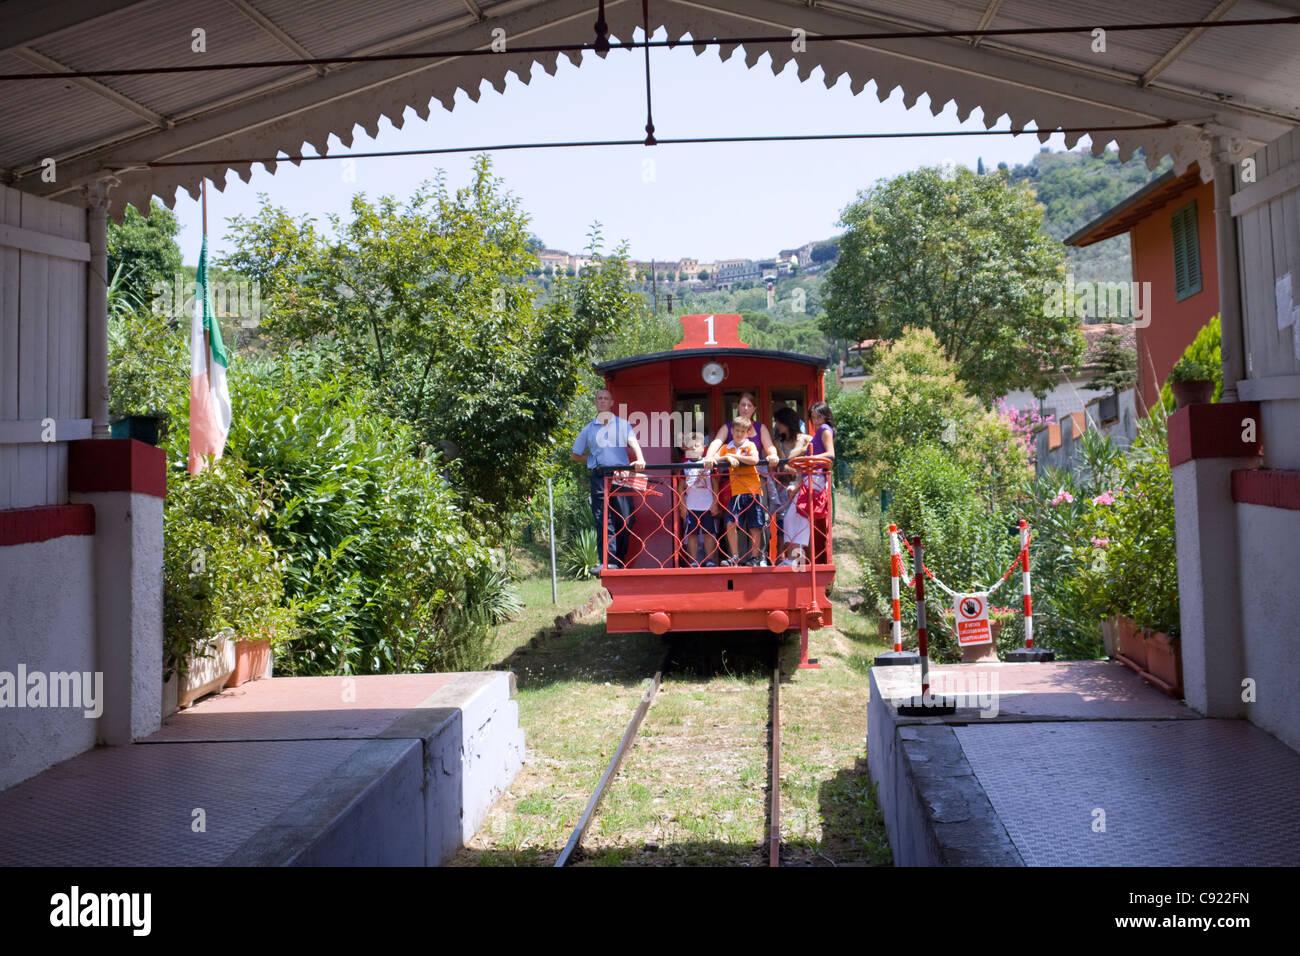 There is a funicular train carrying passengers arriving at the station at Montecatini Terme station. Stock Photo